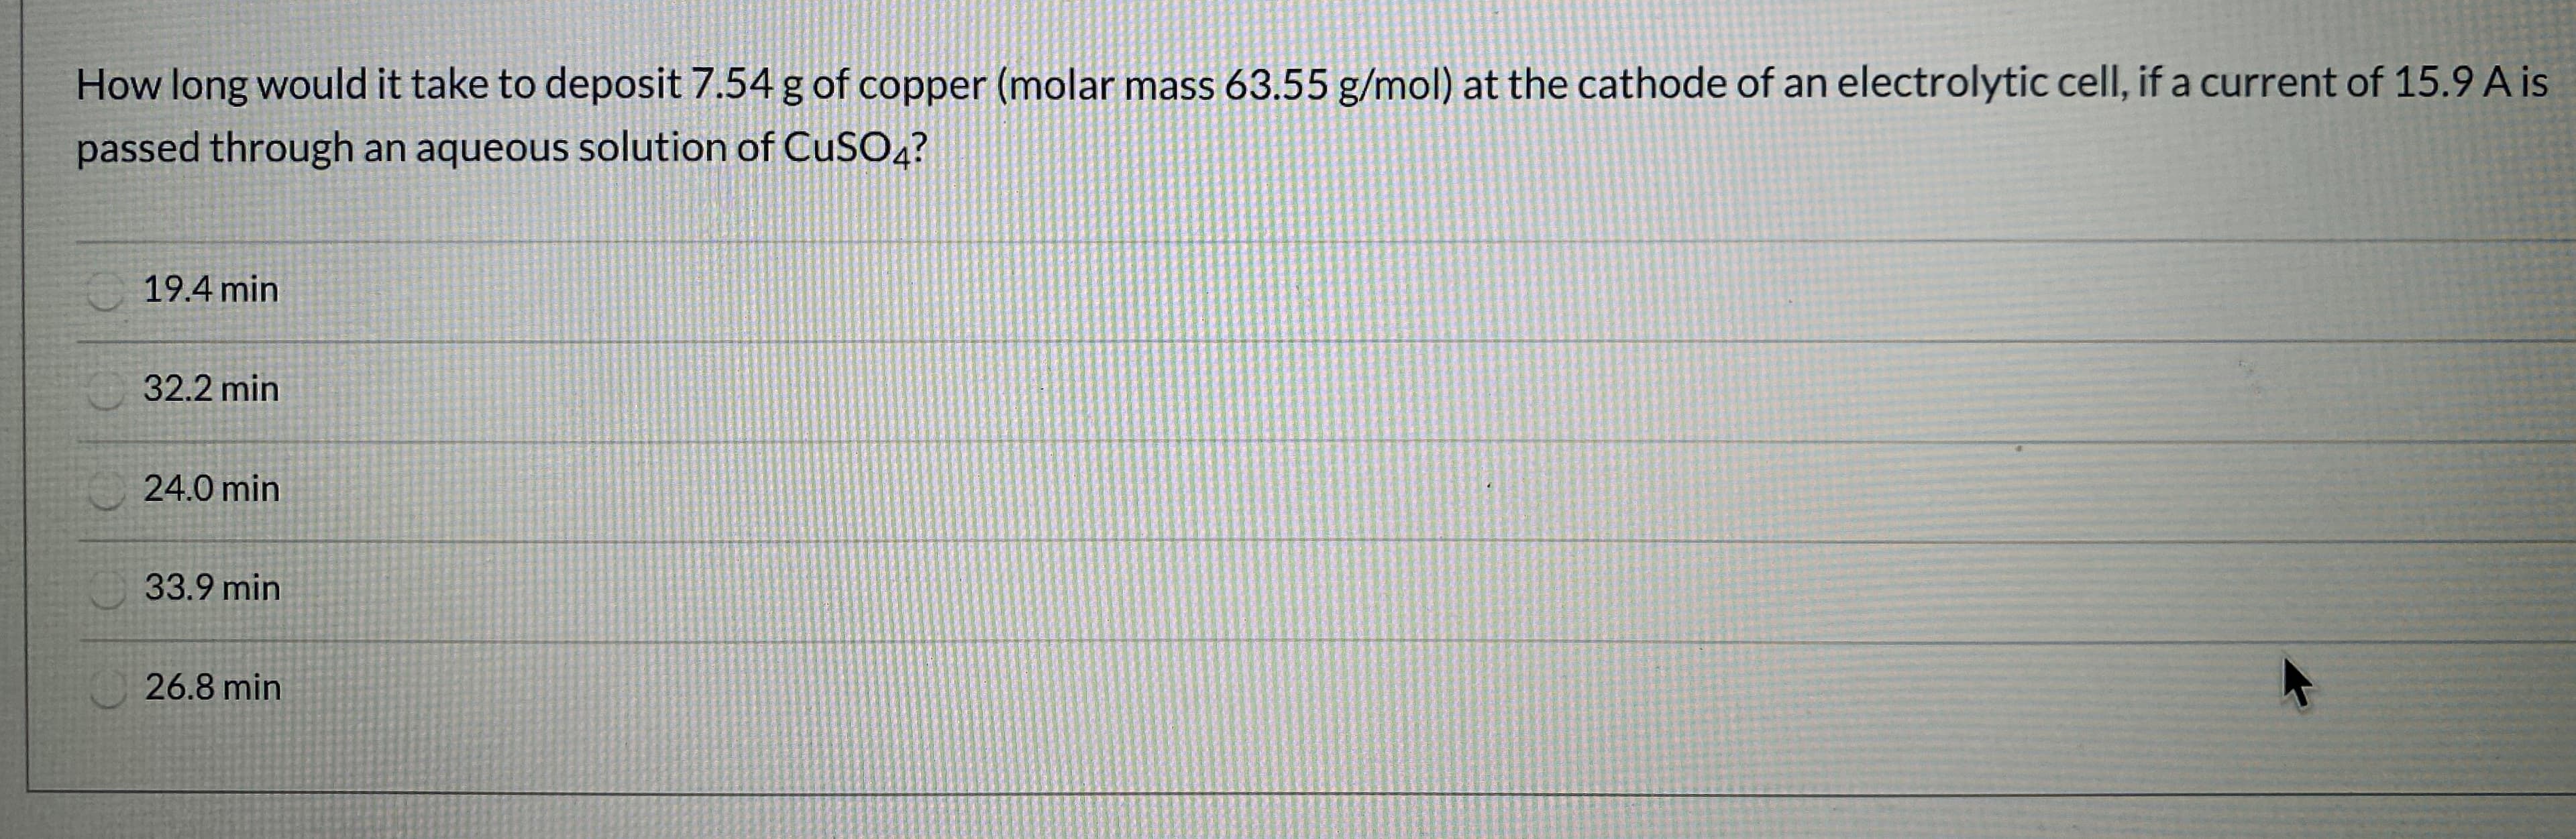 How long would it take to deposit 7.54 g of copper (molar mass 63.55 g/mol) at the cathode of an electrolytic cell, if a current of 15.9 A is
passed through an aqueous solution of CuSOa?
19.4 min
32.2 min
24.0 min
33.9 min
26.8 min
